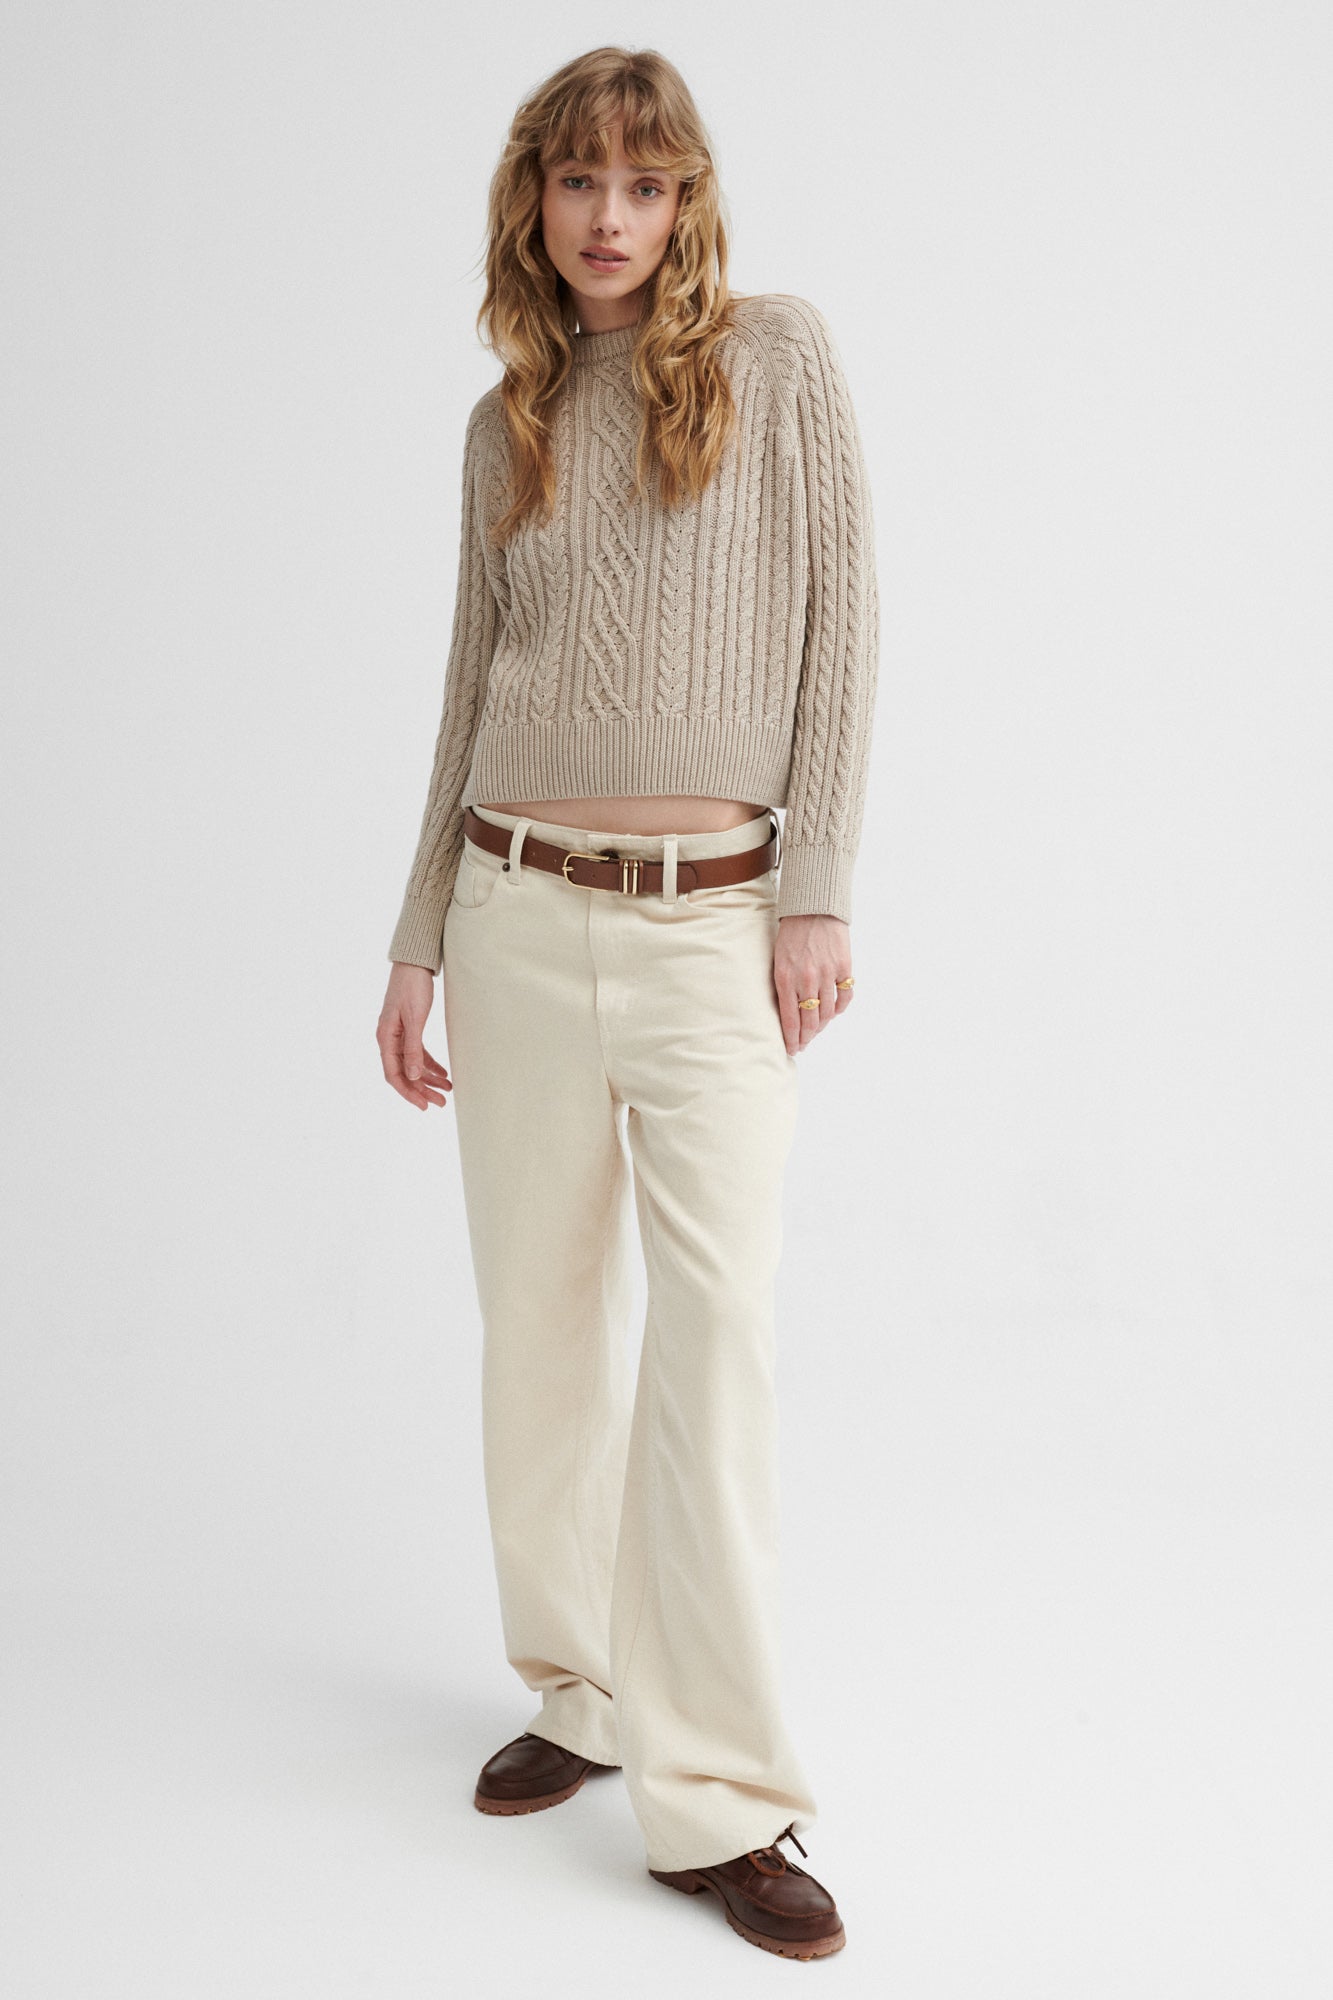 Sweater in organic cotton / 16 / 14 / dust storm